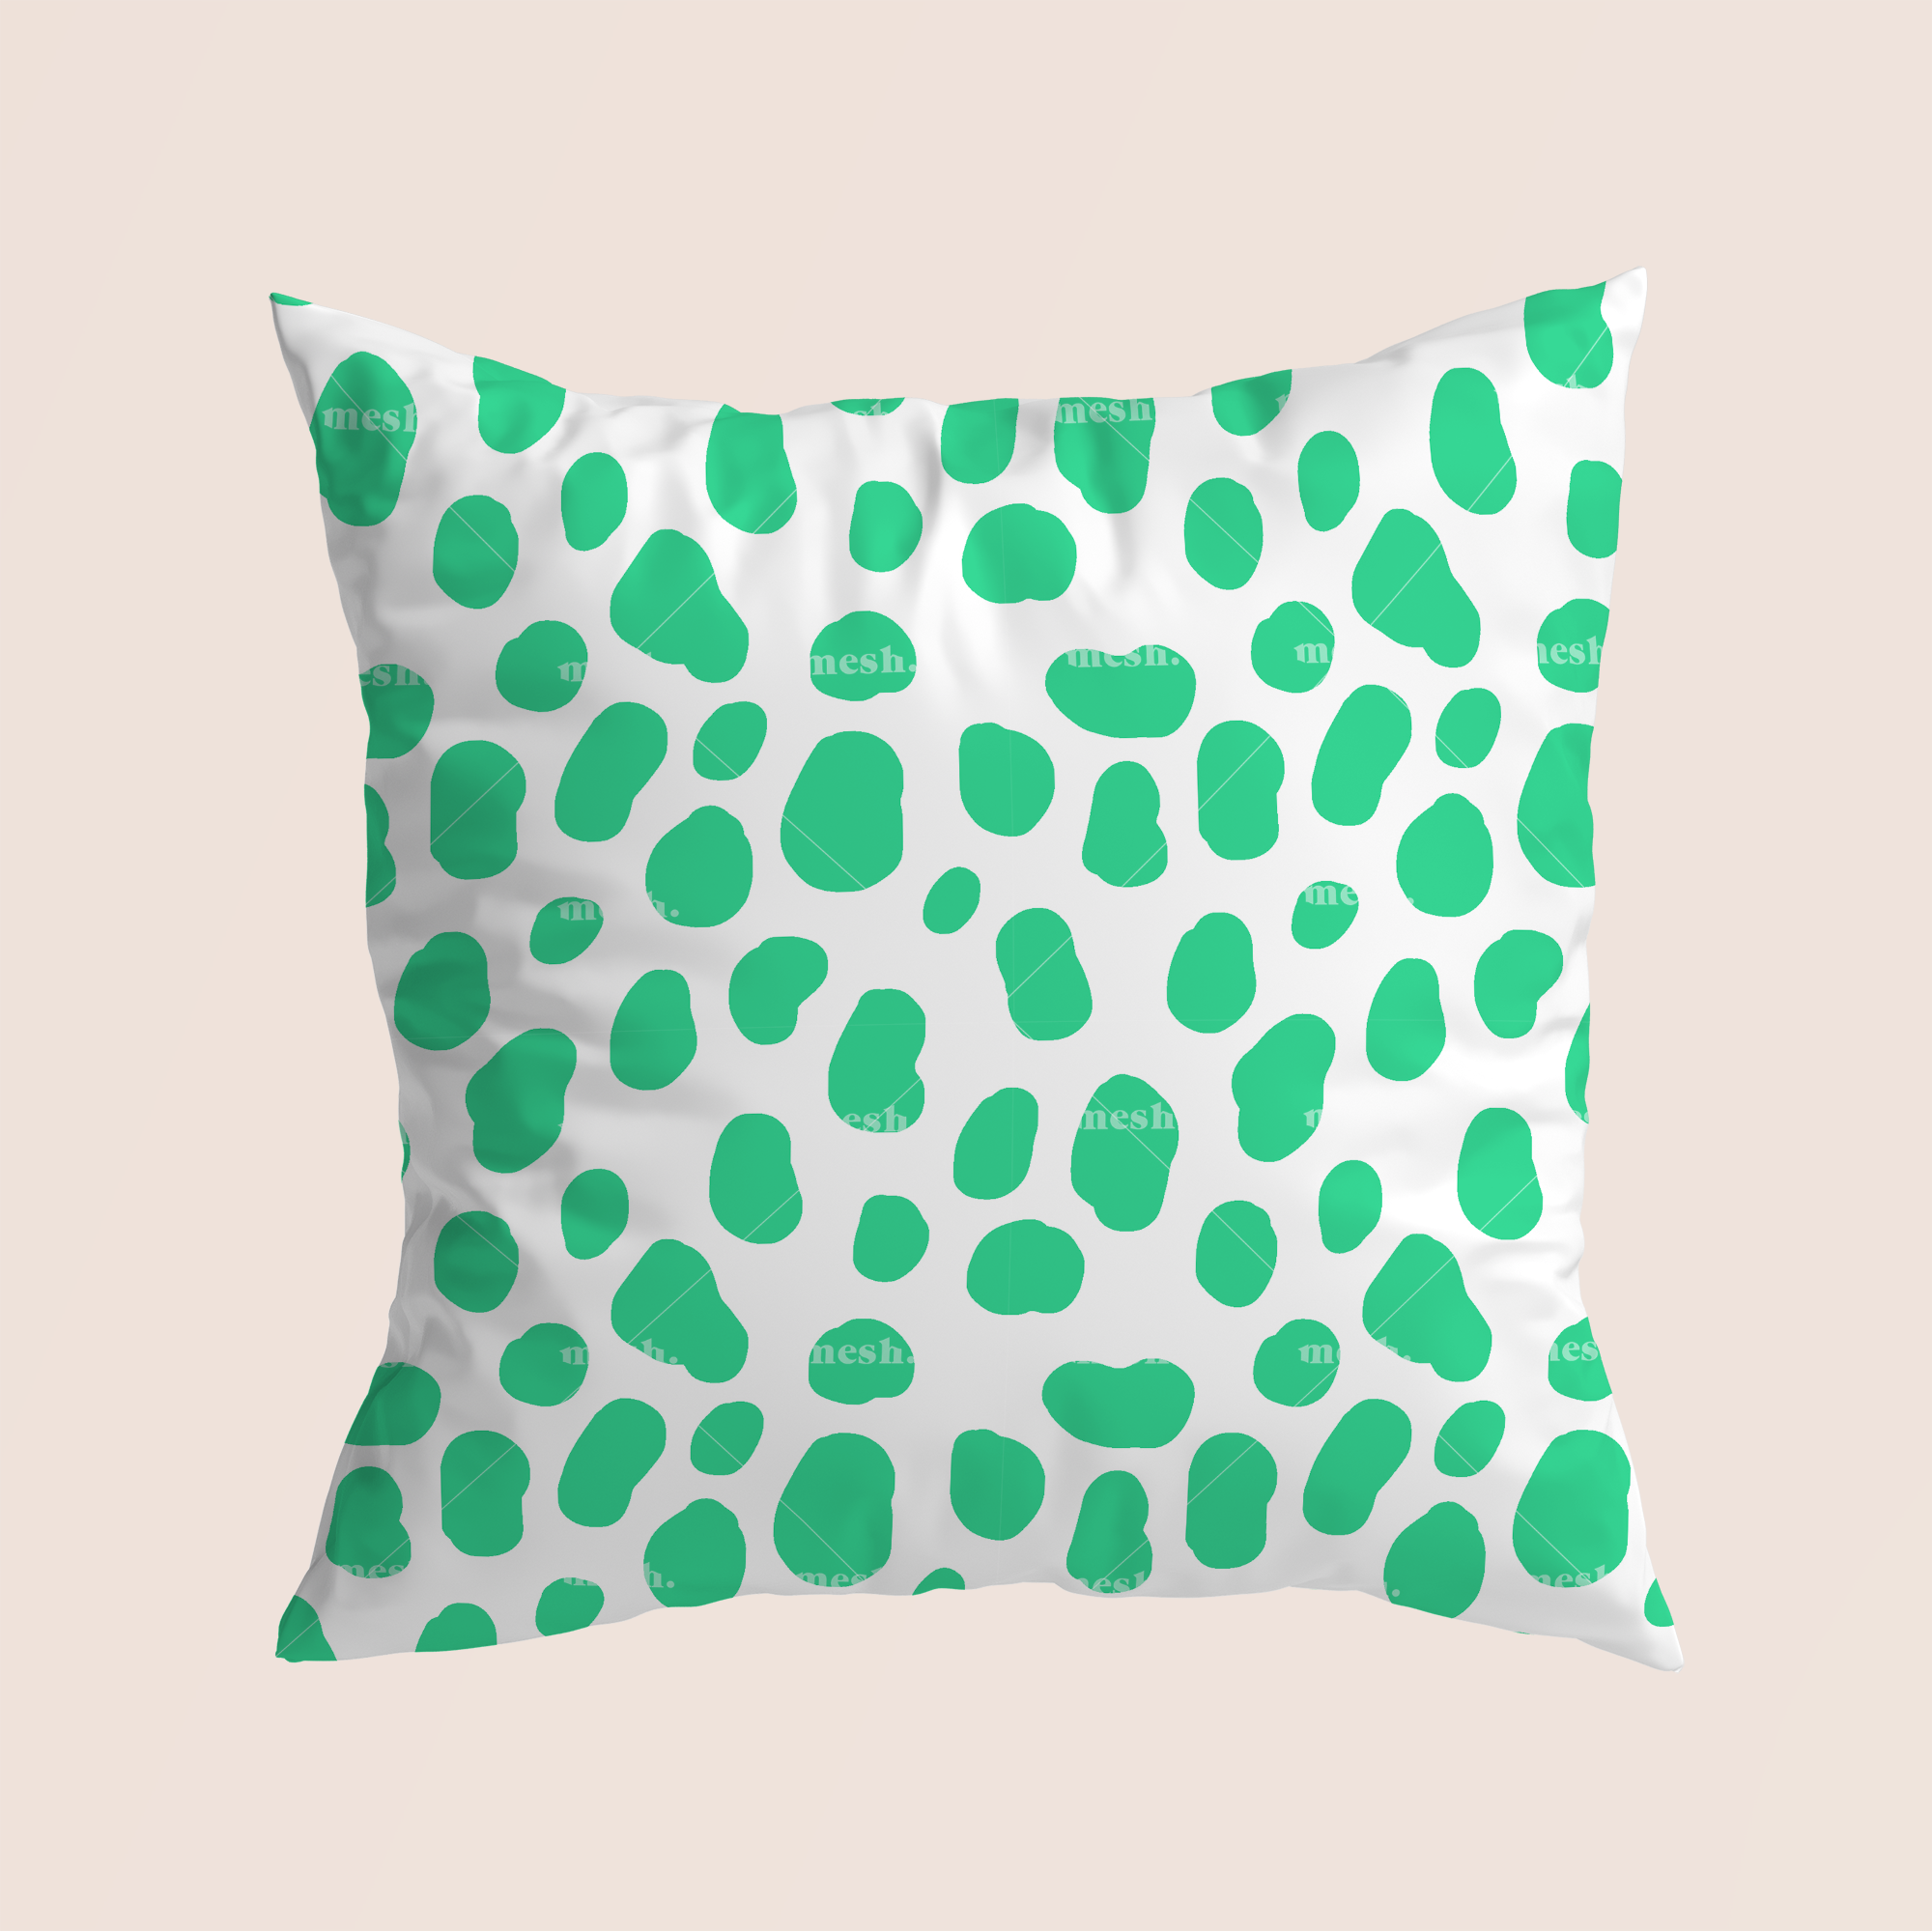 Wild animal coloured skin in green pattern design printed on recycled fabric pillow